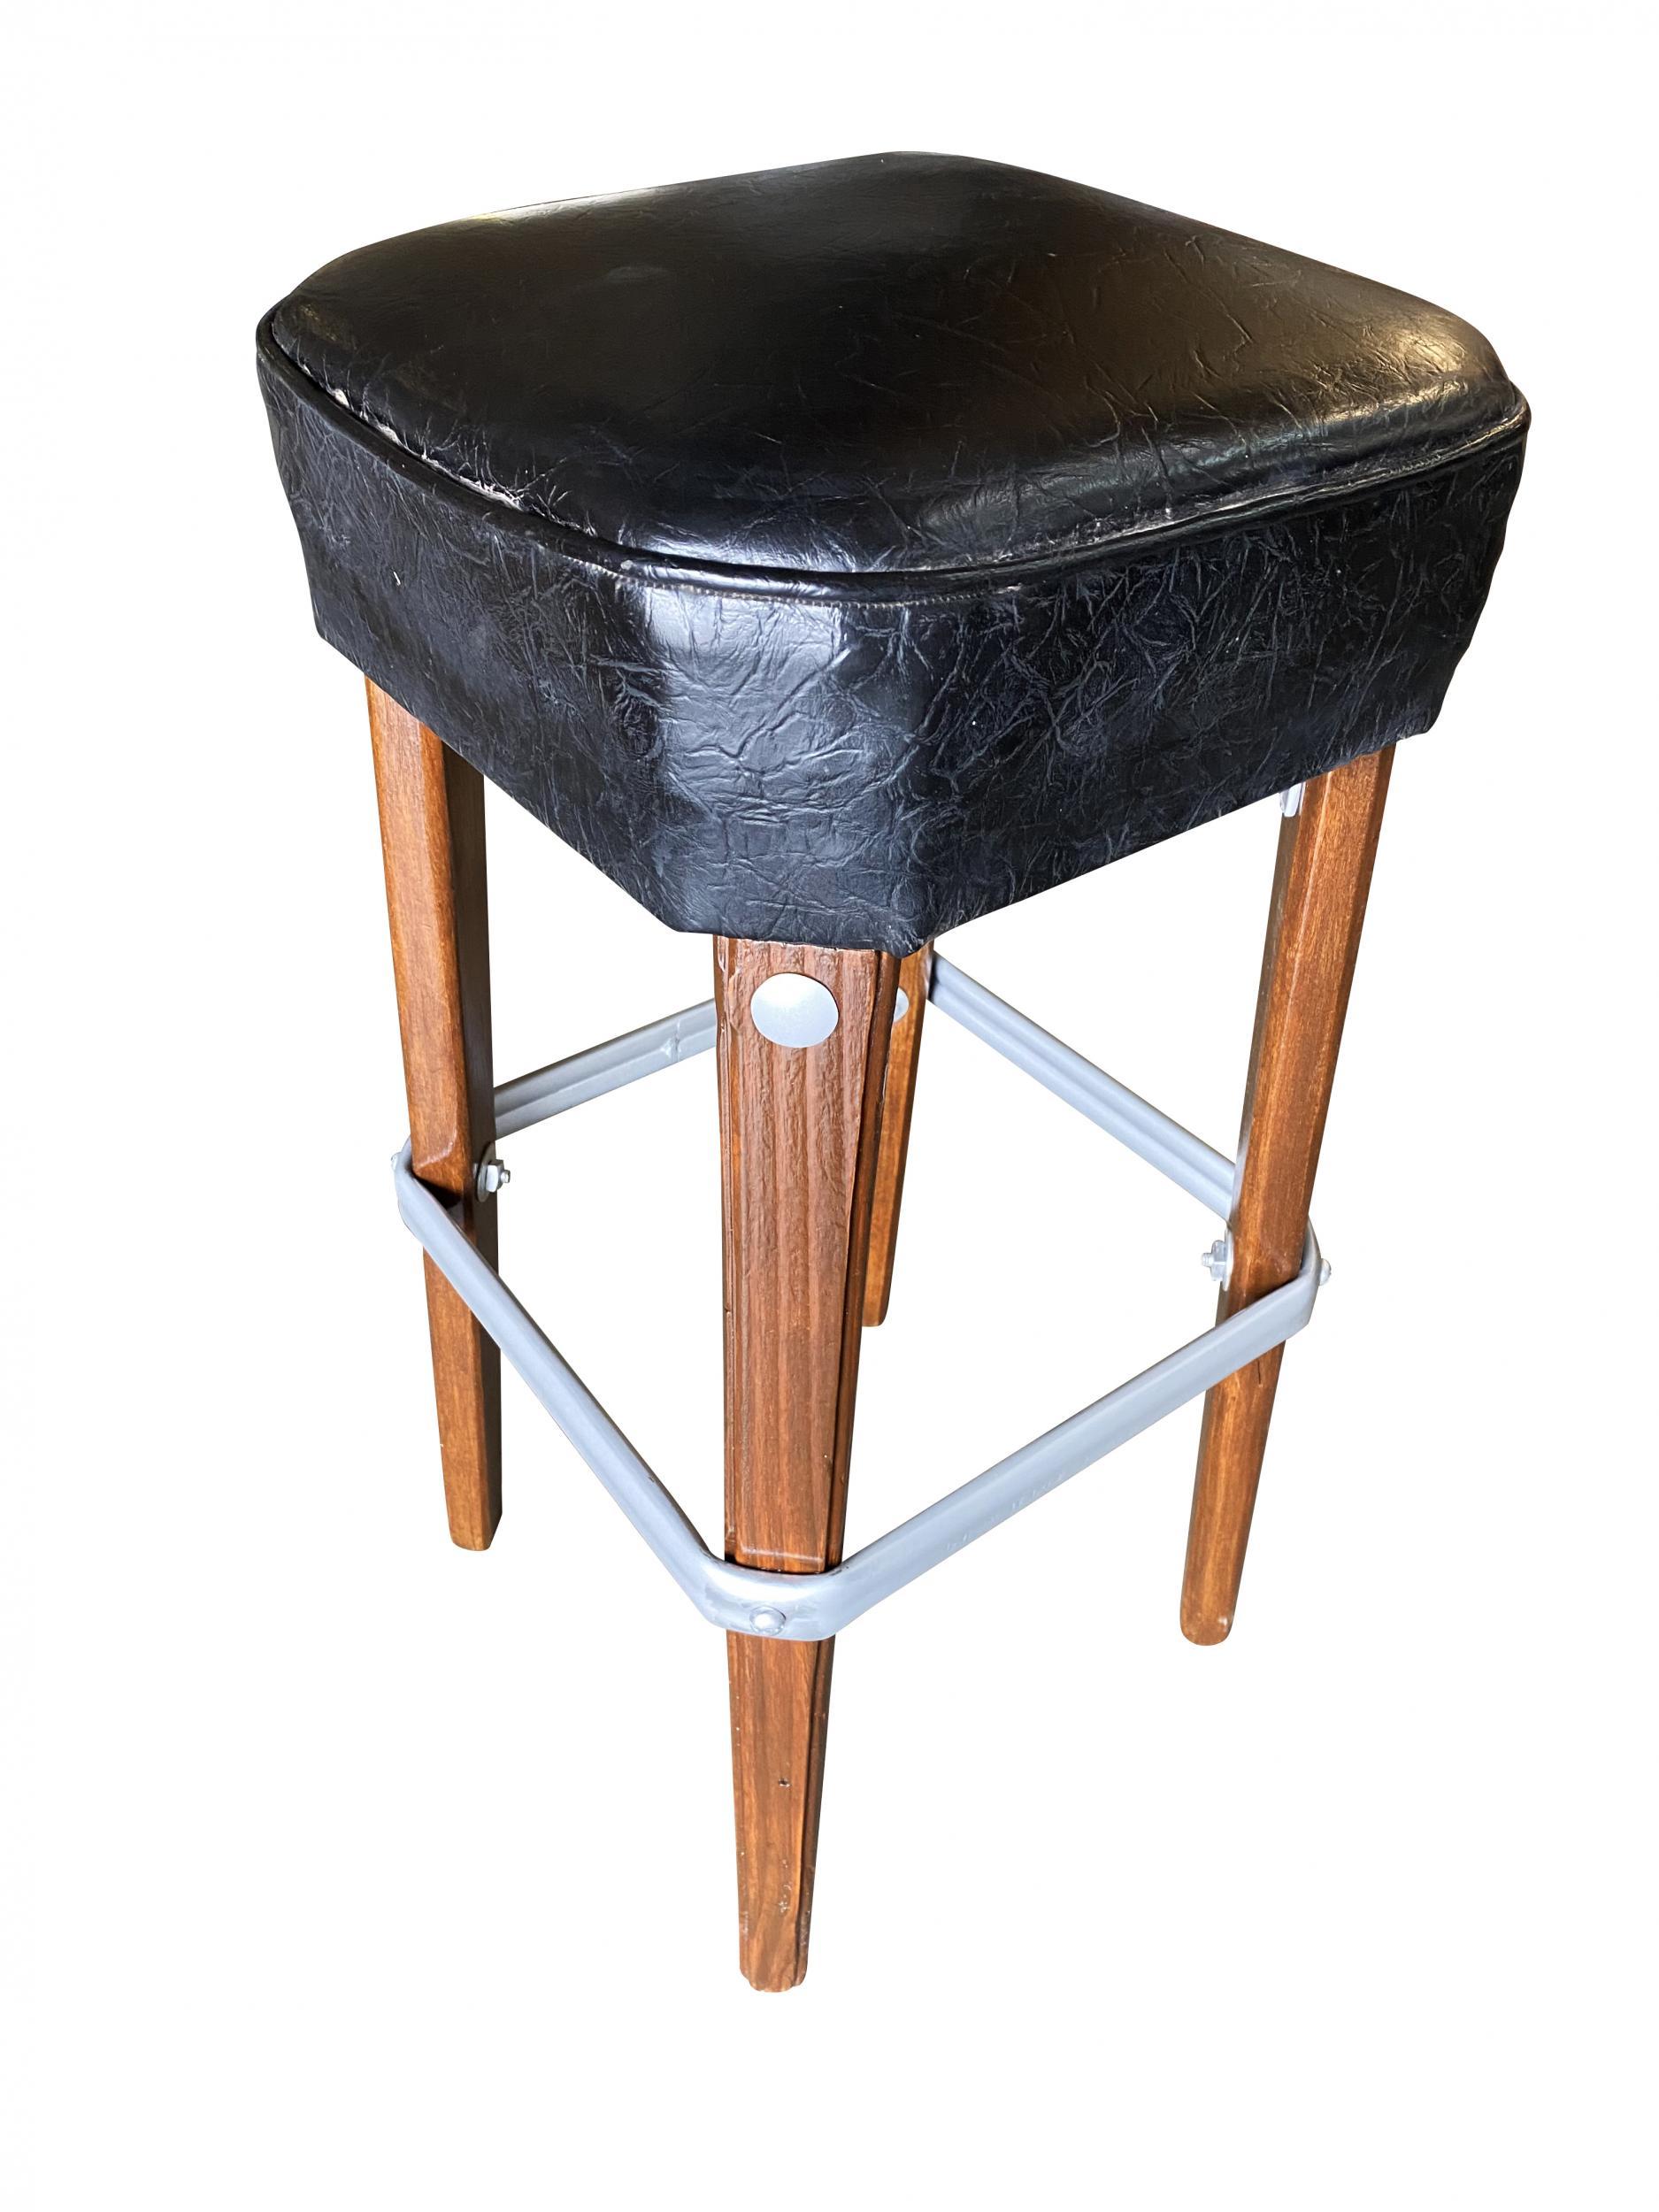 Pair of original 1970s modernist steel studded knife Leg bar stools. Each bar stool comes with a steel foot rest and black Naugahyde seat covers.

Sold as a set of 2.

 